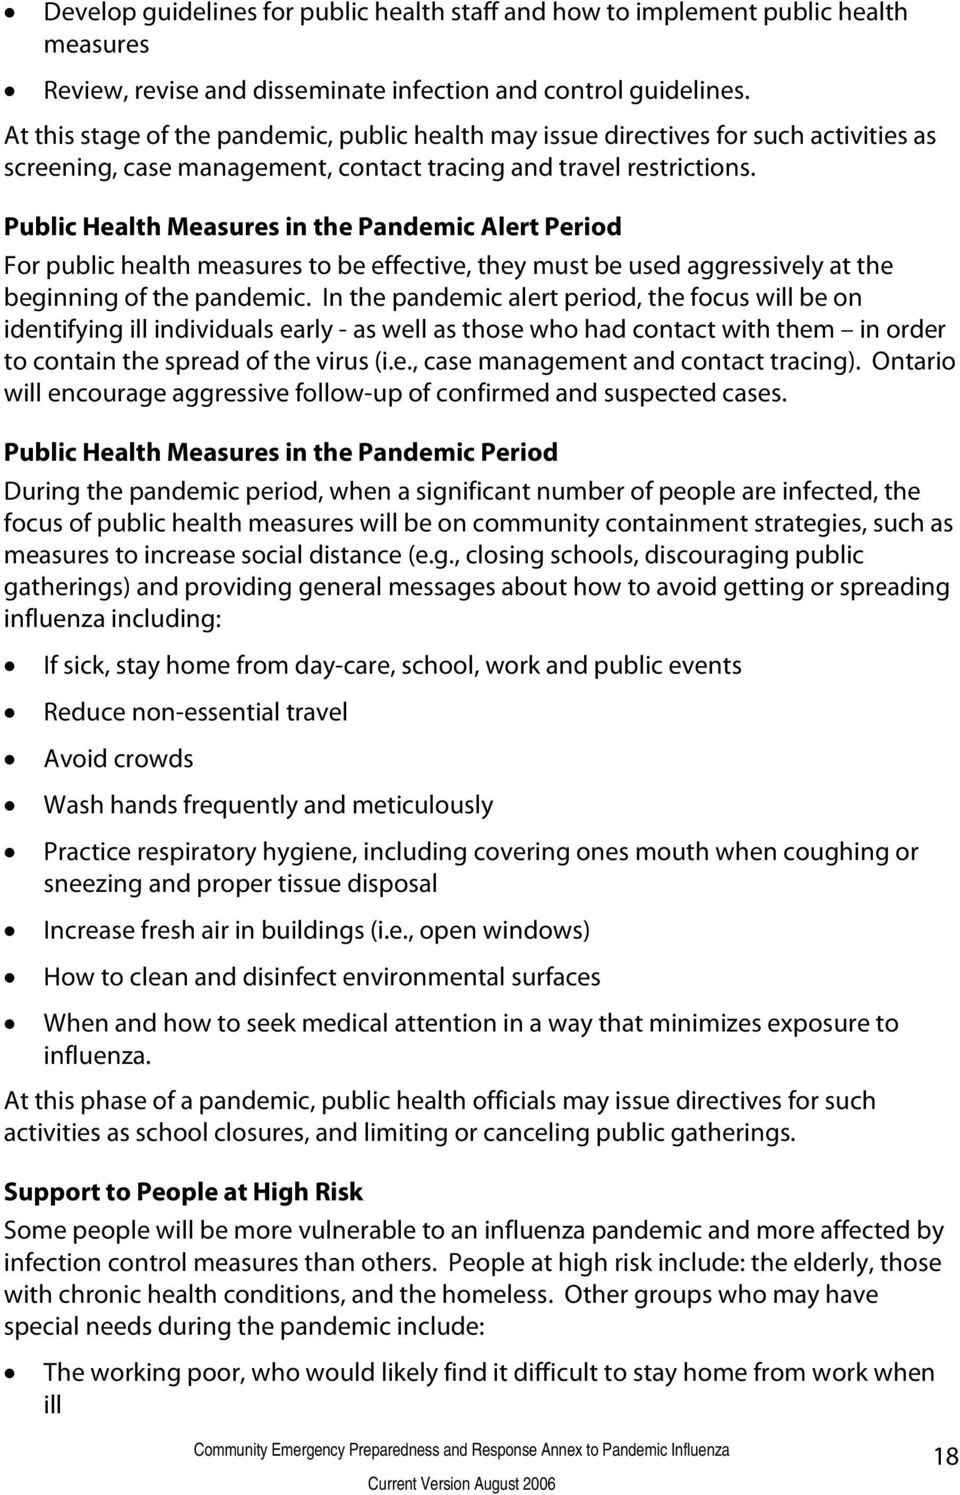 Public Health Measures in the Pandemic Alert Period For public health measures to be effective, they must be used aggressively at the beginning of the pandemic.